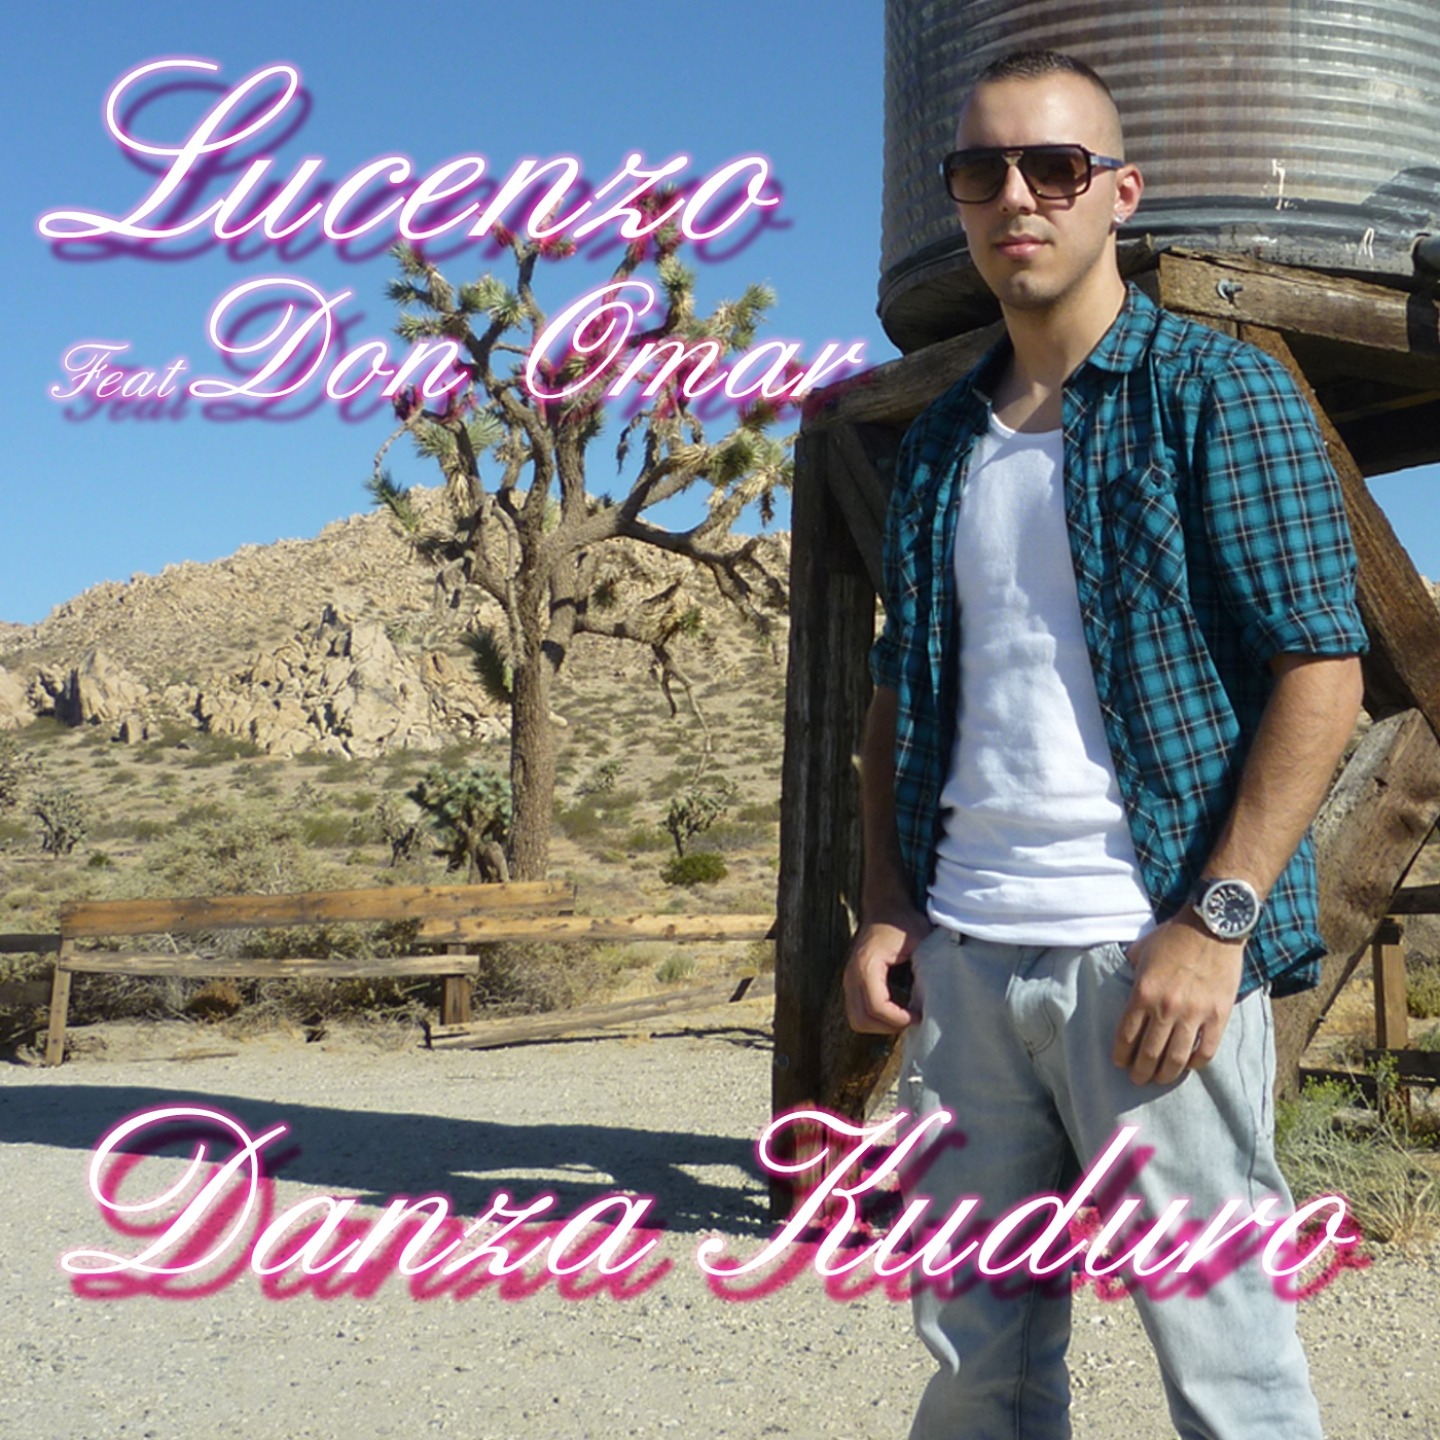 Lucenzo feat Don Omar